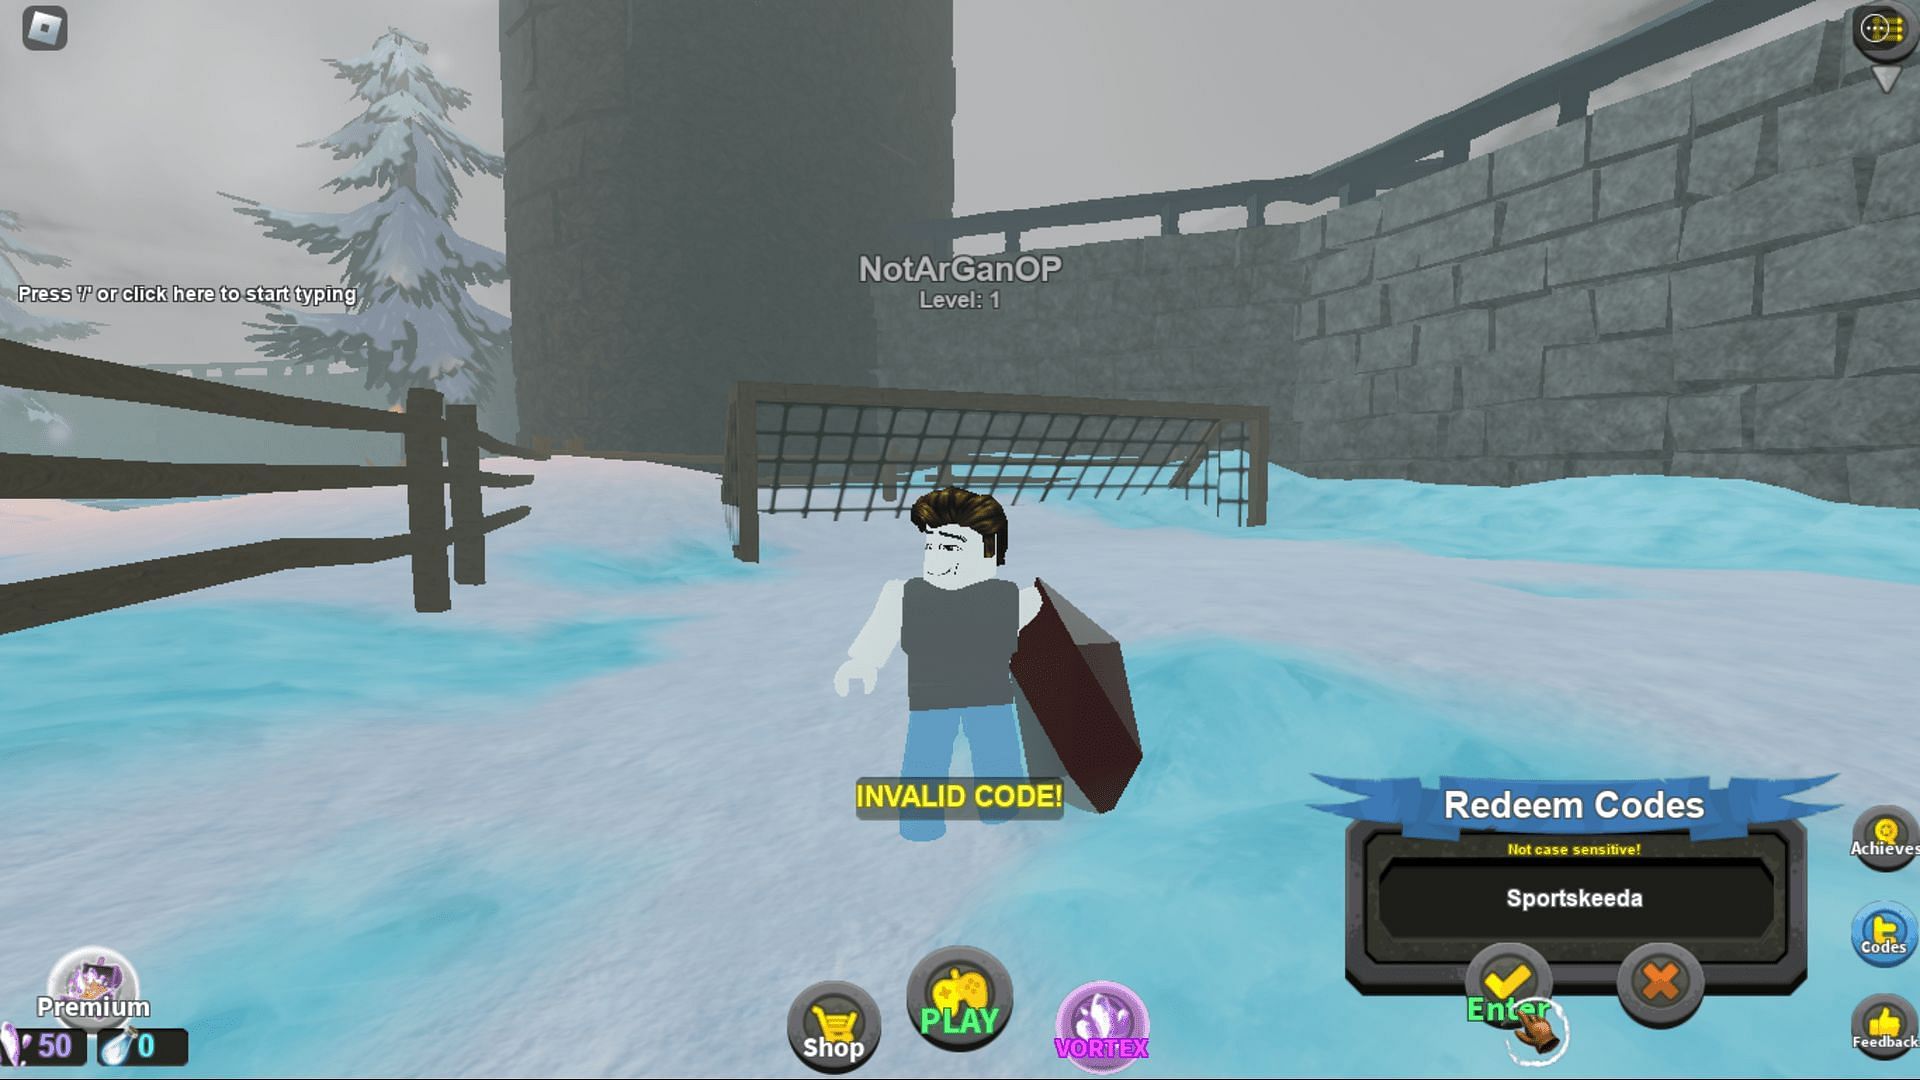 Troubleshoot codes in Tower Defenders with ease (Image via Roblox)